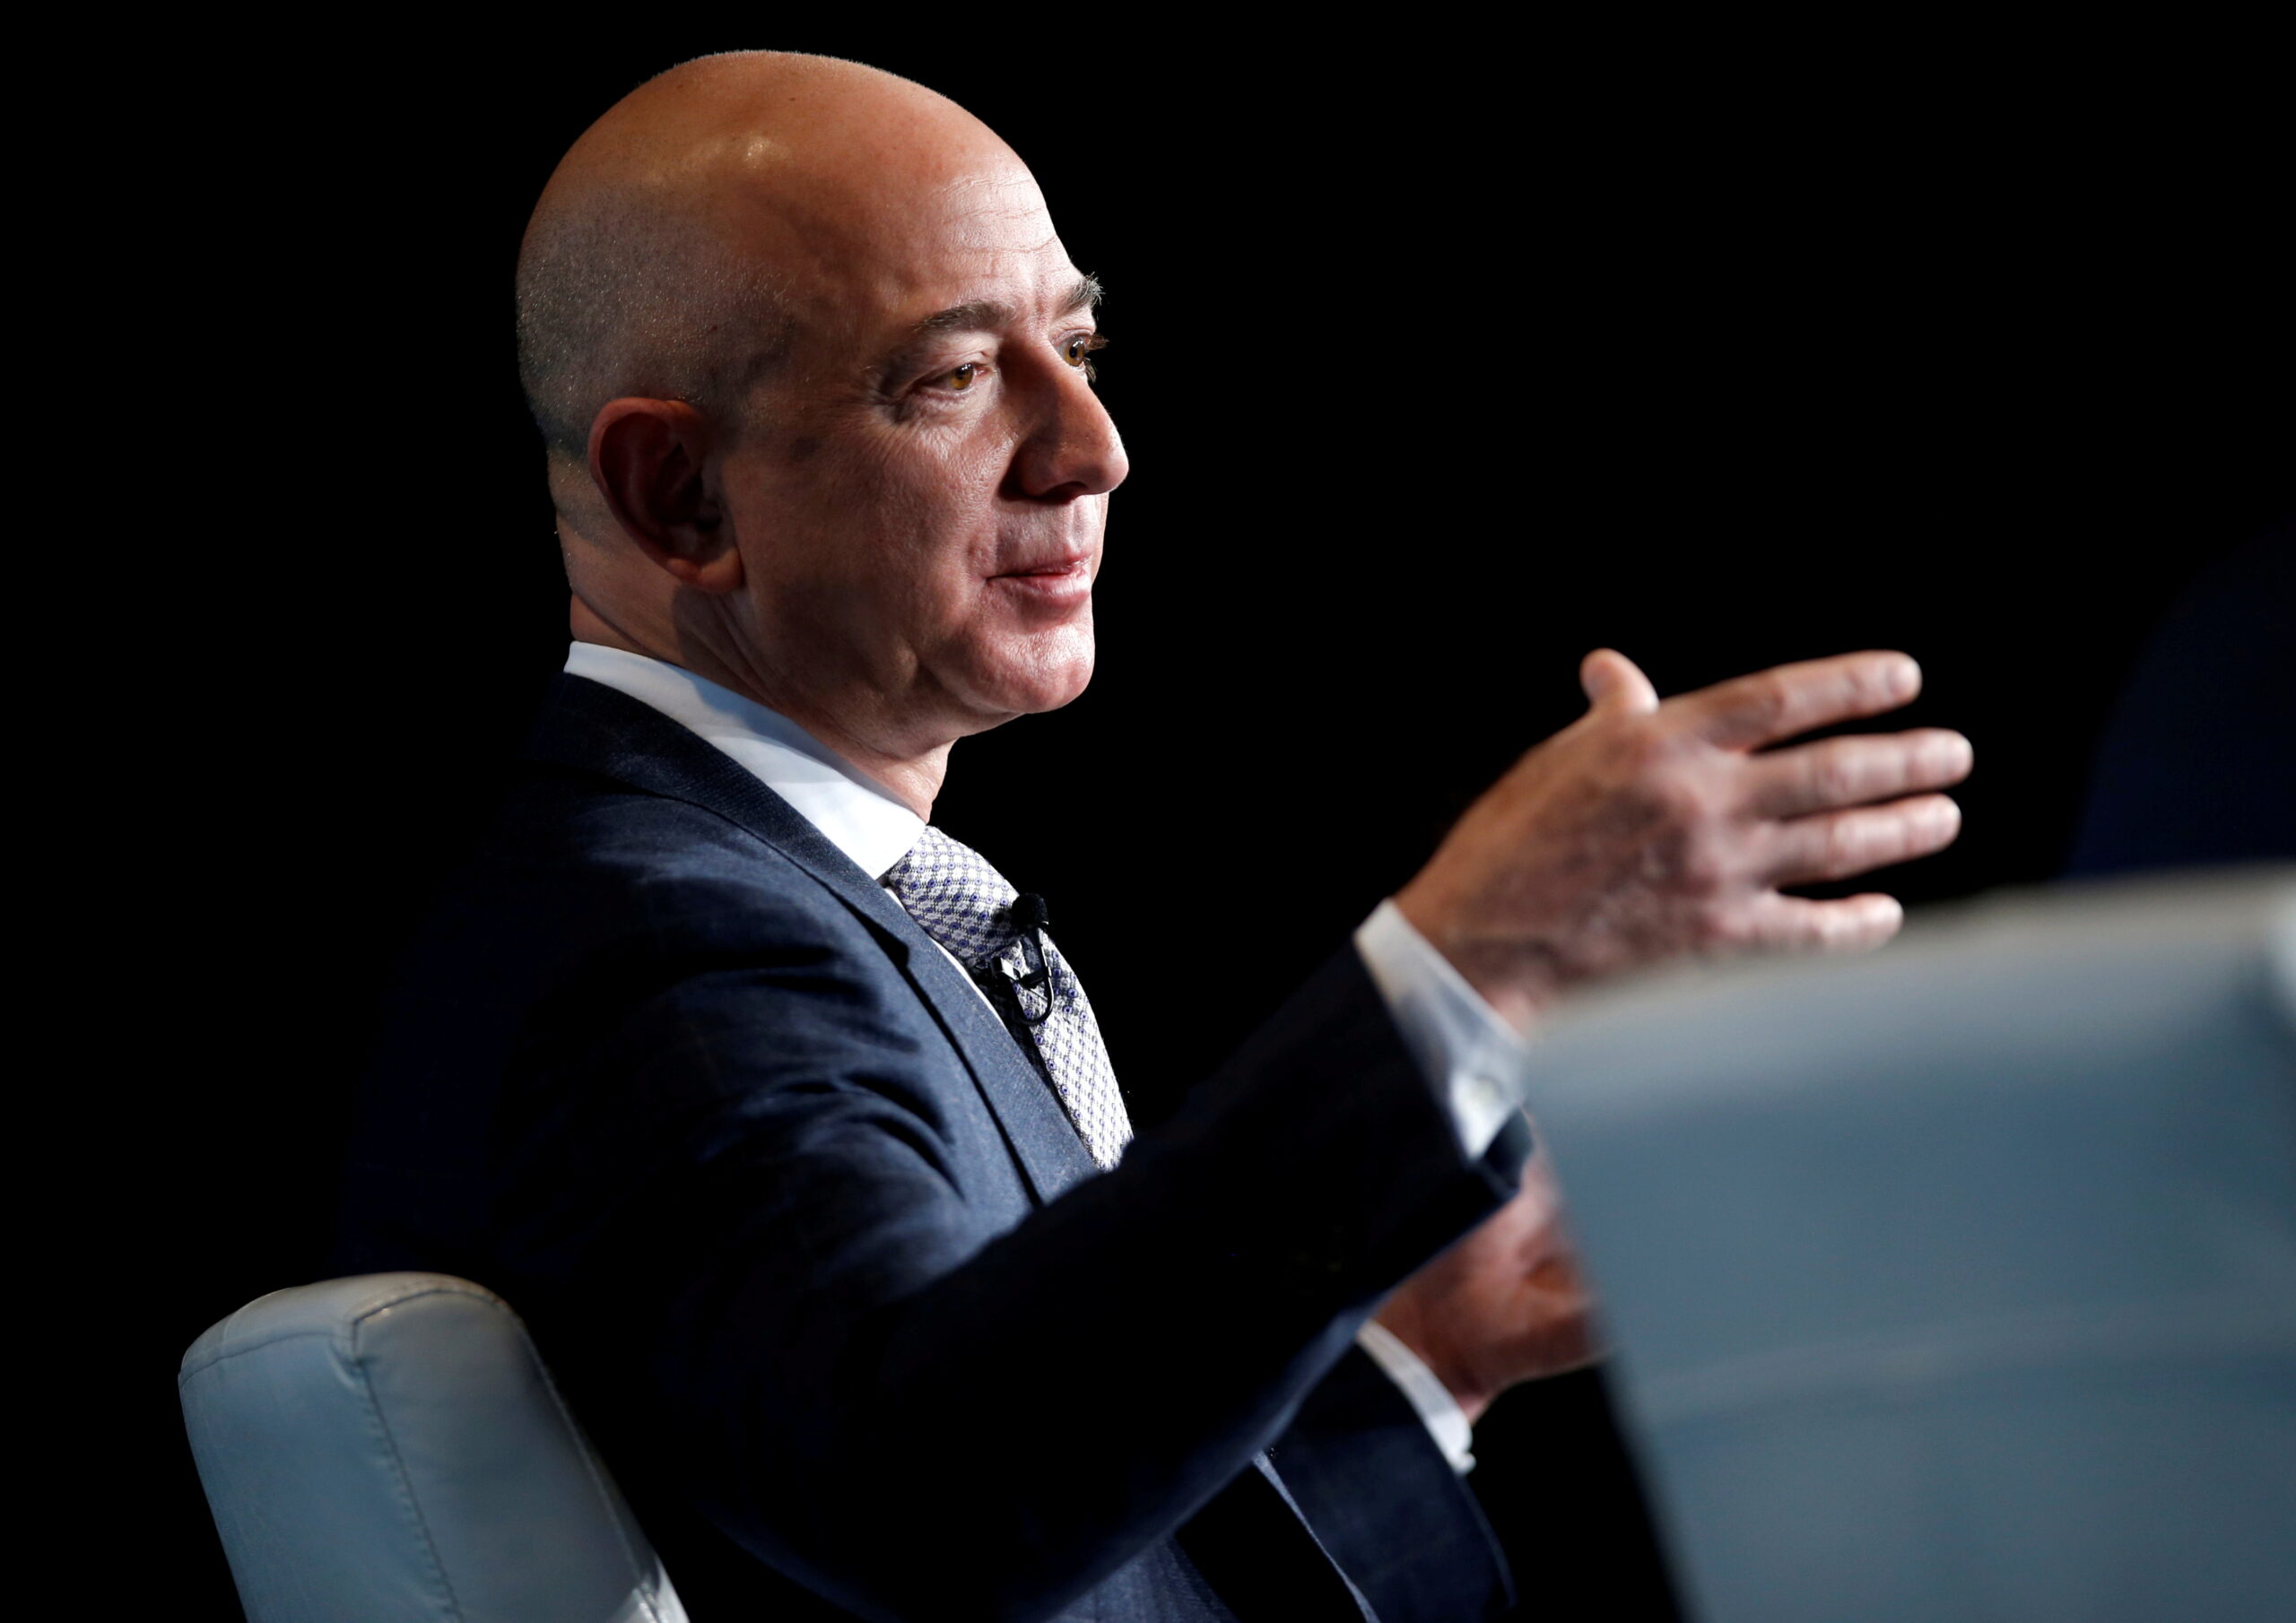  Jeff Bezos, world’s richest man, set for inaugural space voyage